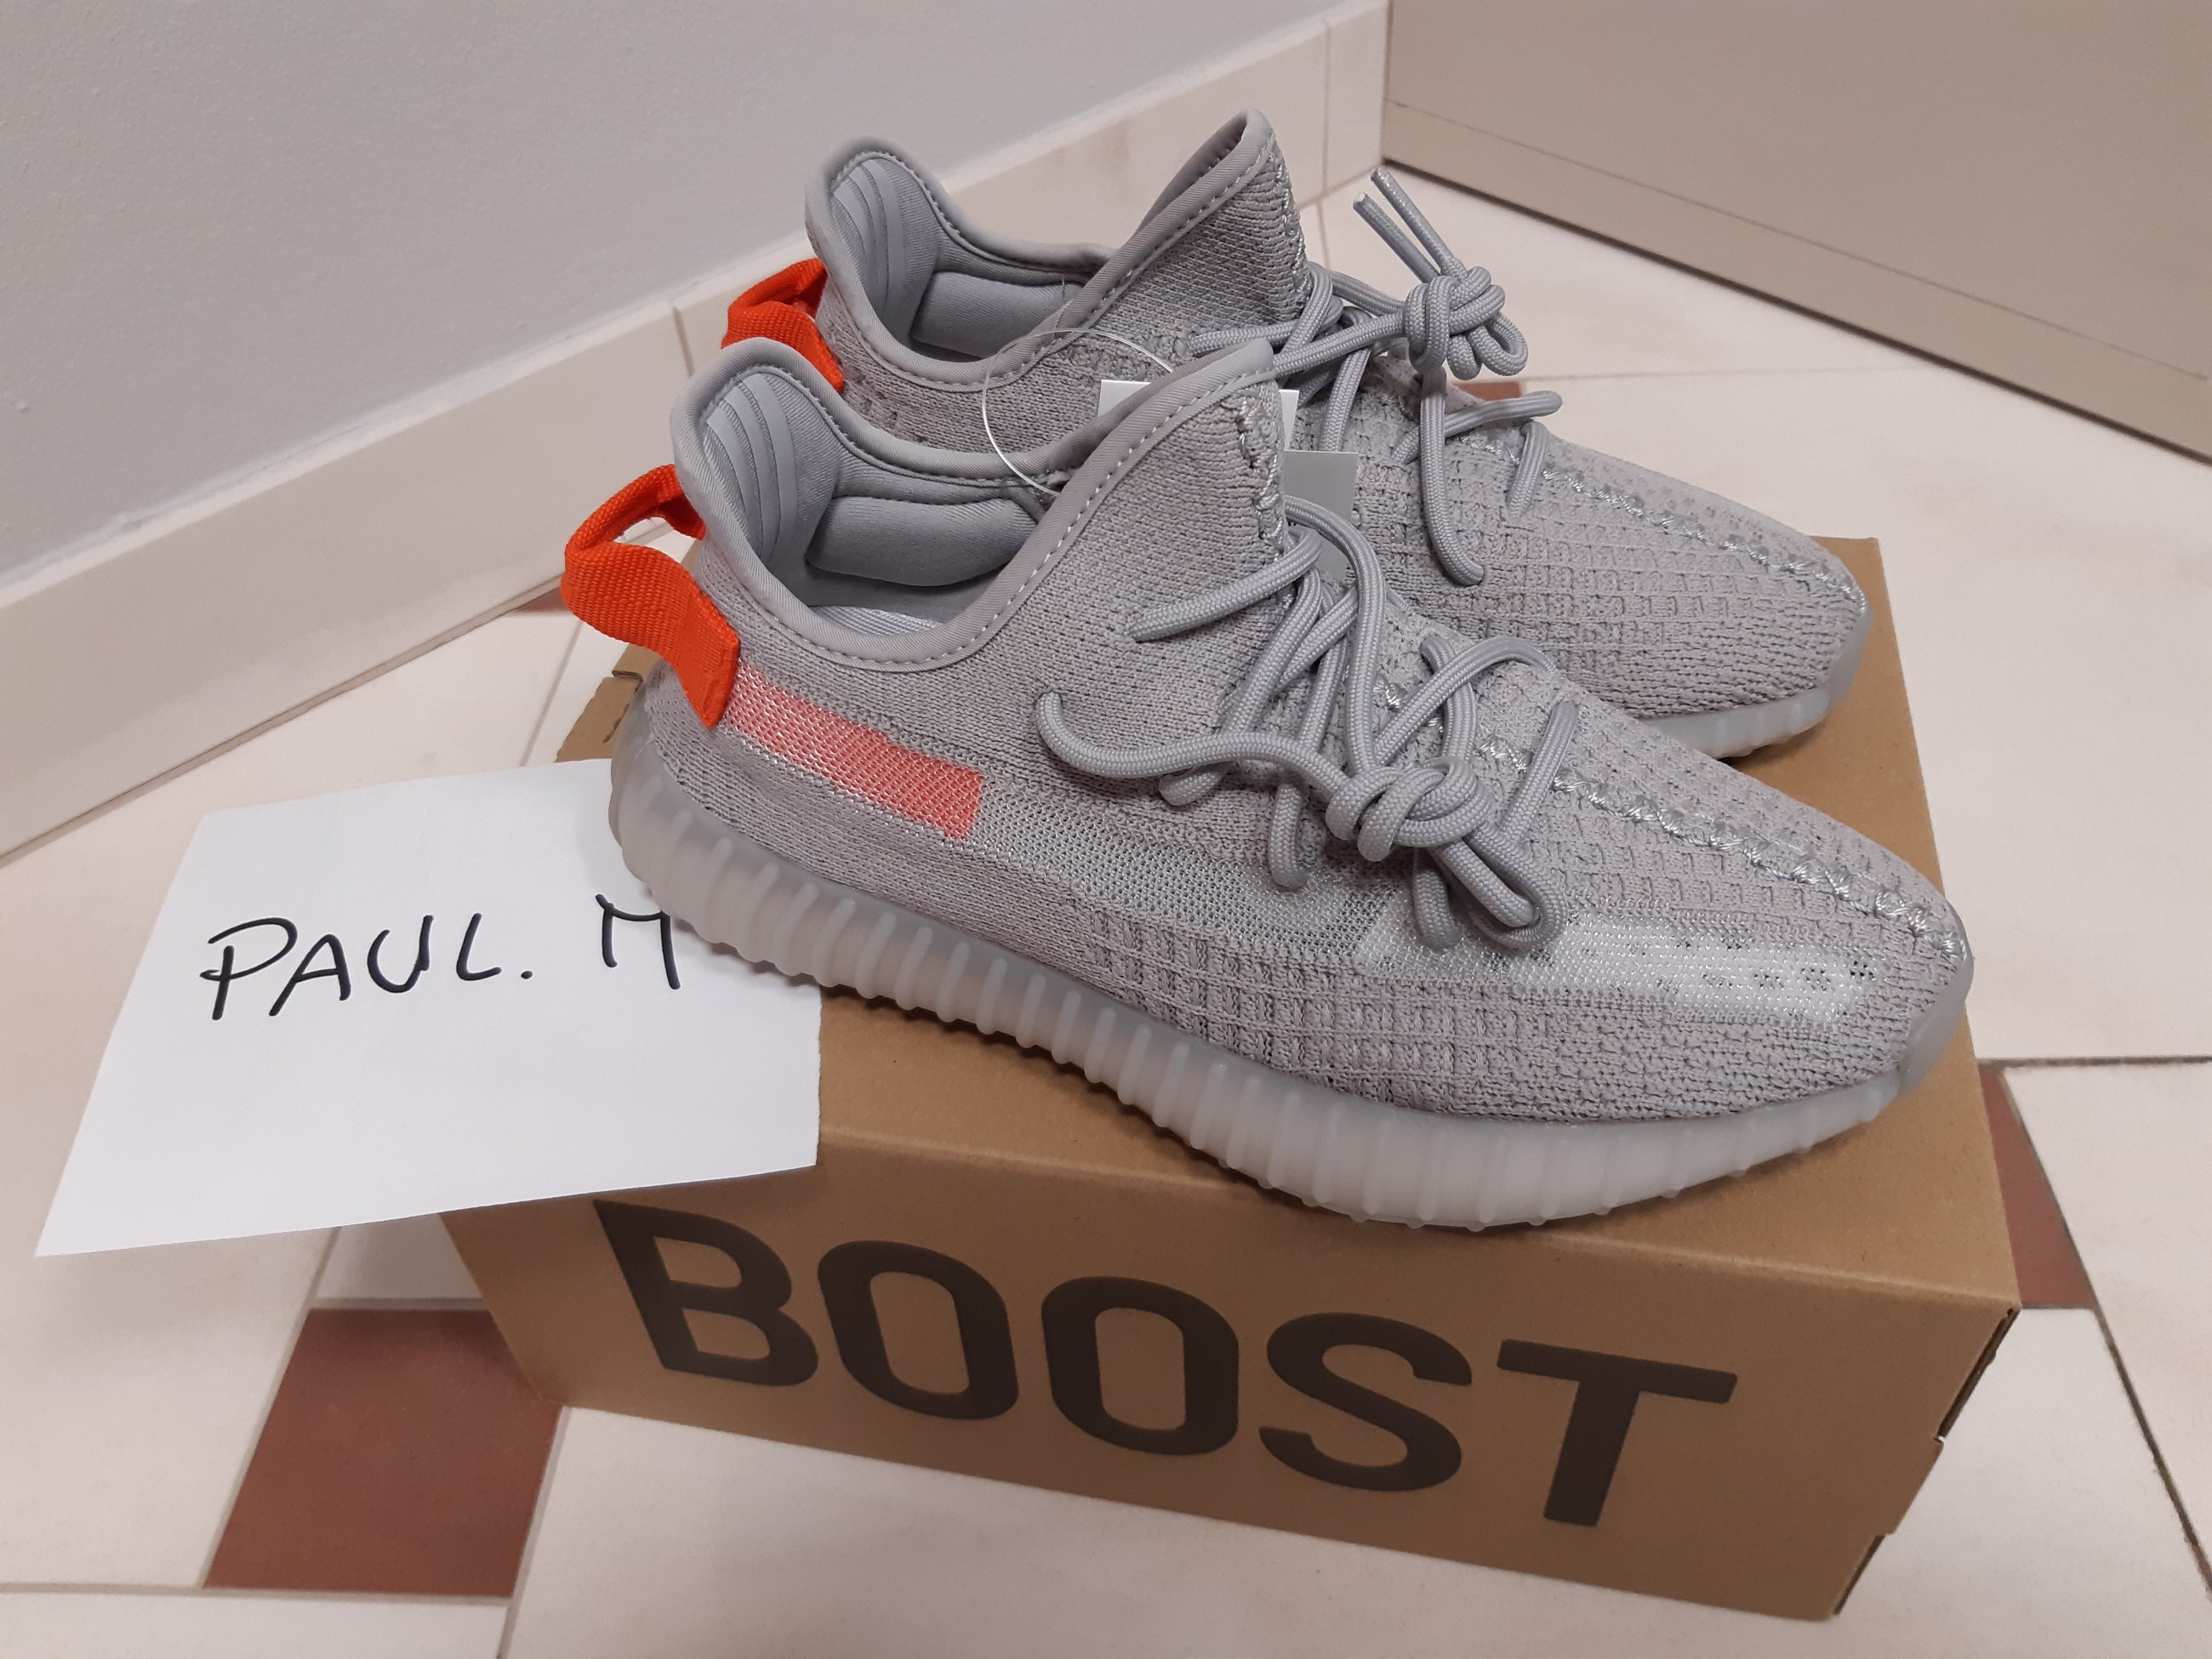 Cheap Adidas Yeezy Boost 350 V2 Beluga Size 9 M 10 W Bb1826 2016 No Insoles